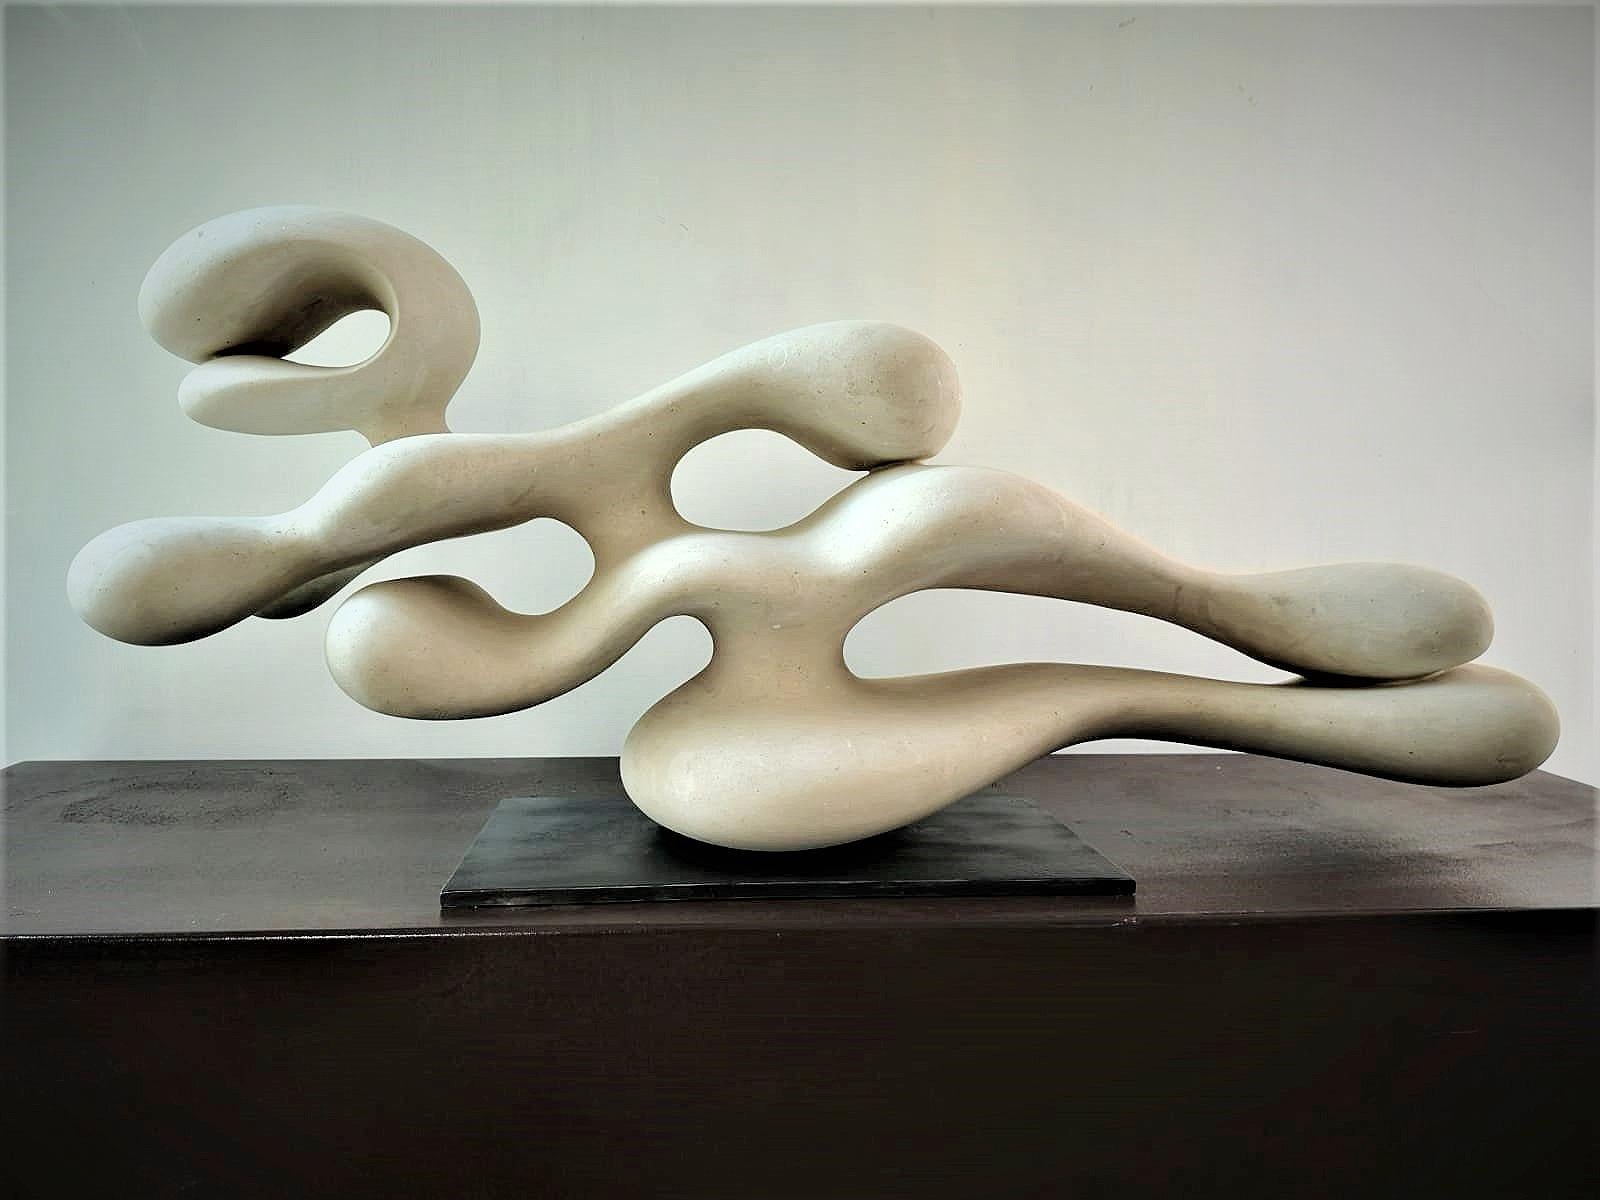 21st Century abstract sculpture Stretch by Renzo Buttazzo from Italy. Measure: 40 cm height.

Sculpture in Lecce Stone
Delivered with a certificate of authenticity.

Since 1886 Renzo Buttazzo work with Pietra Leccese (limestone from Lecce), and